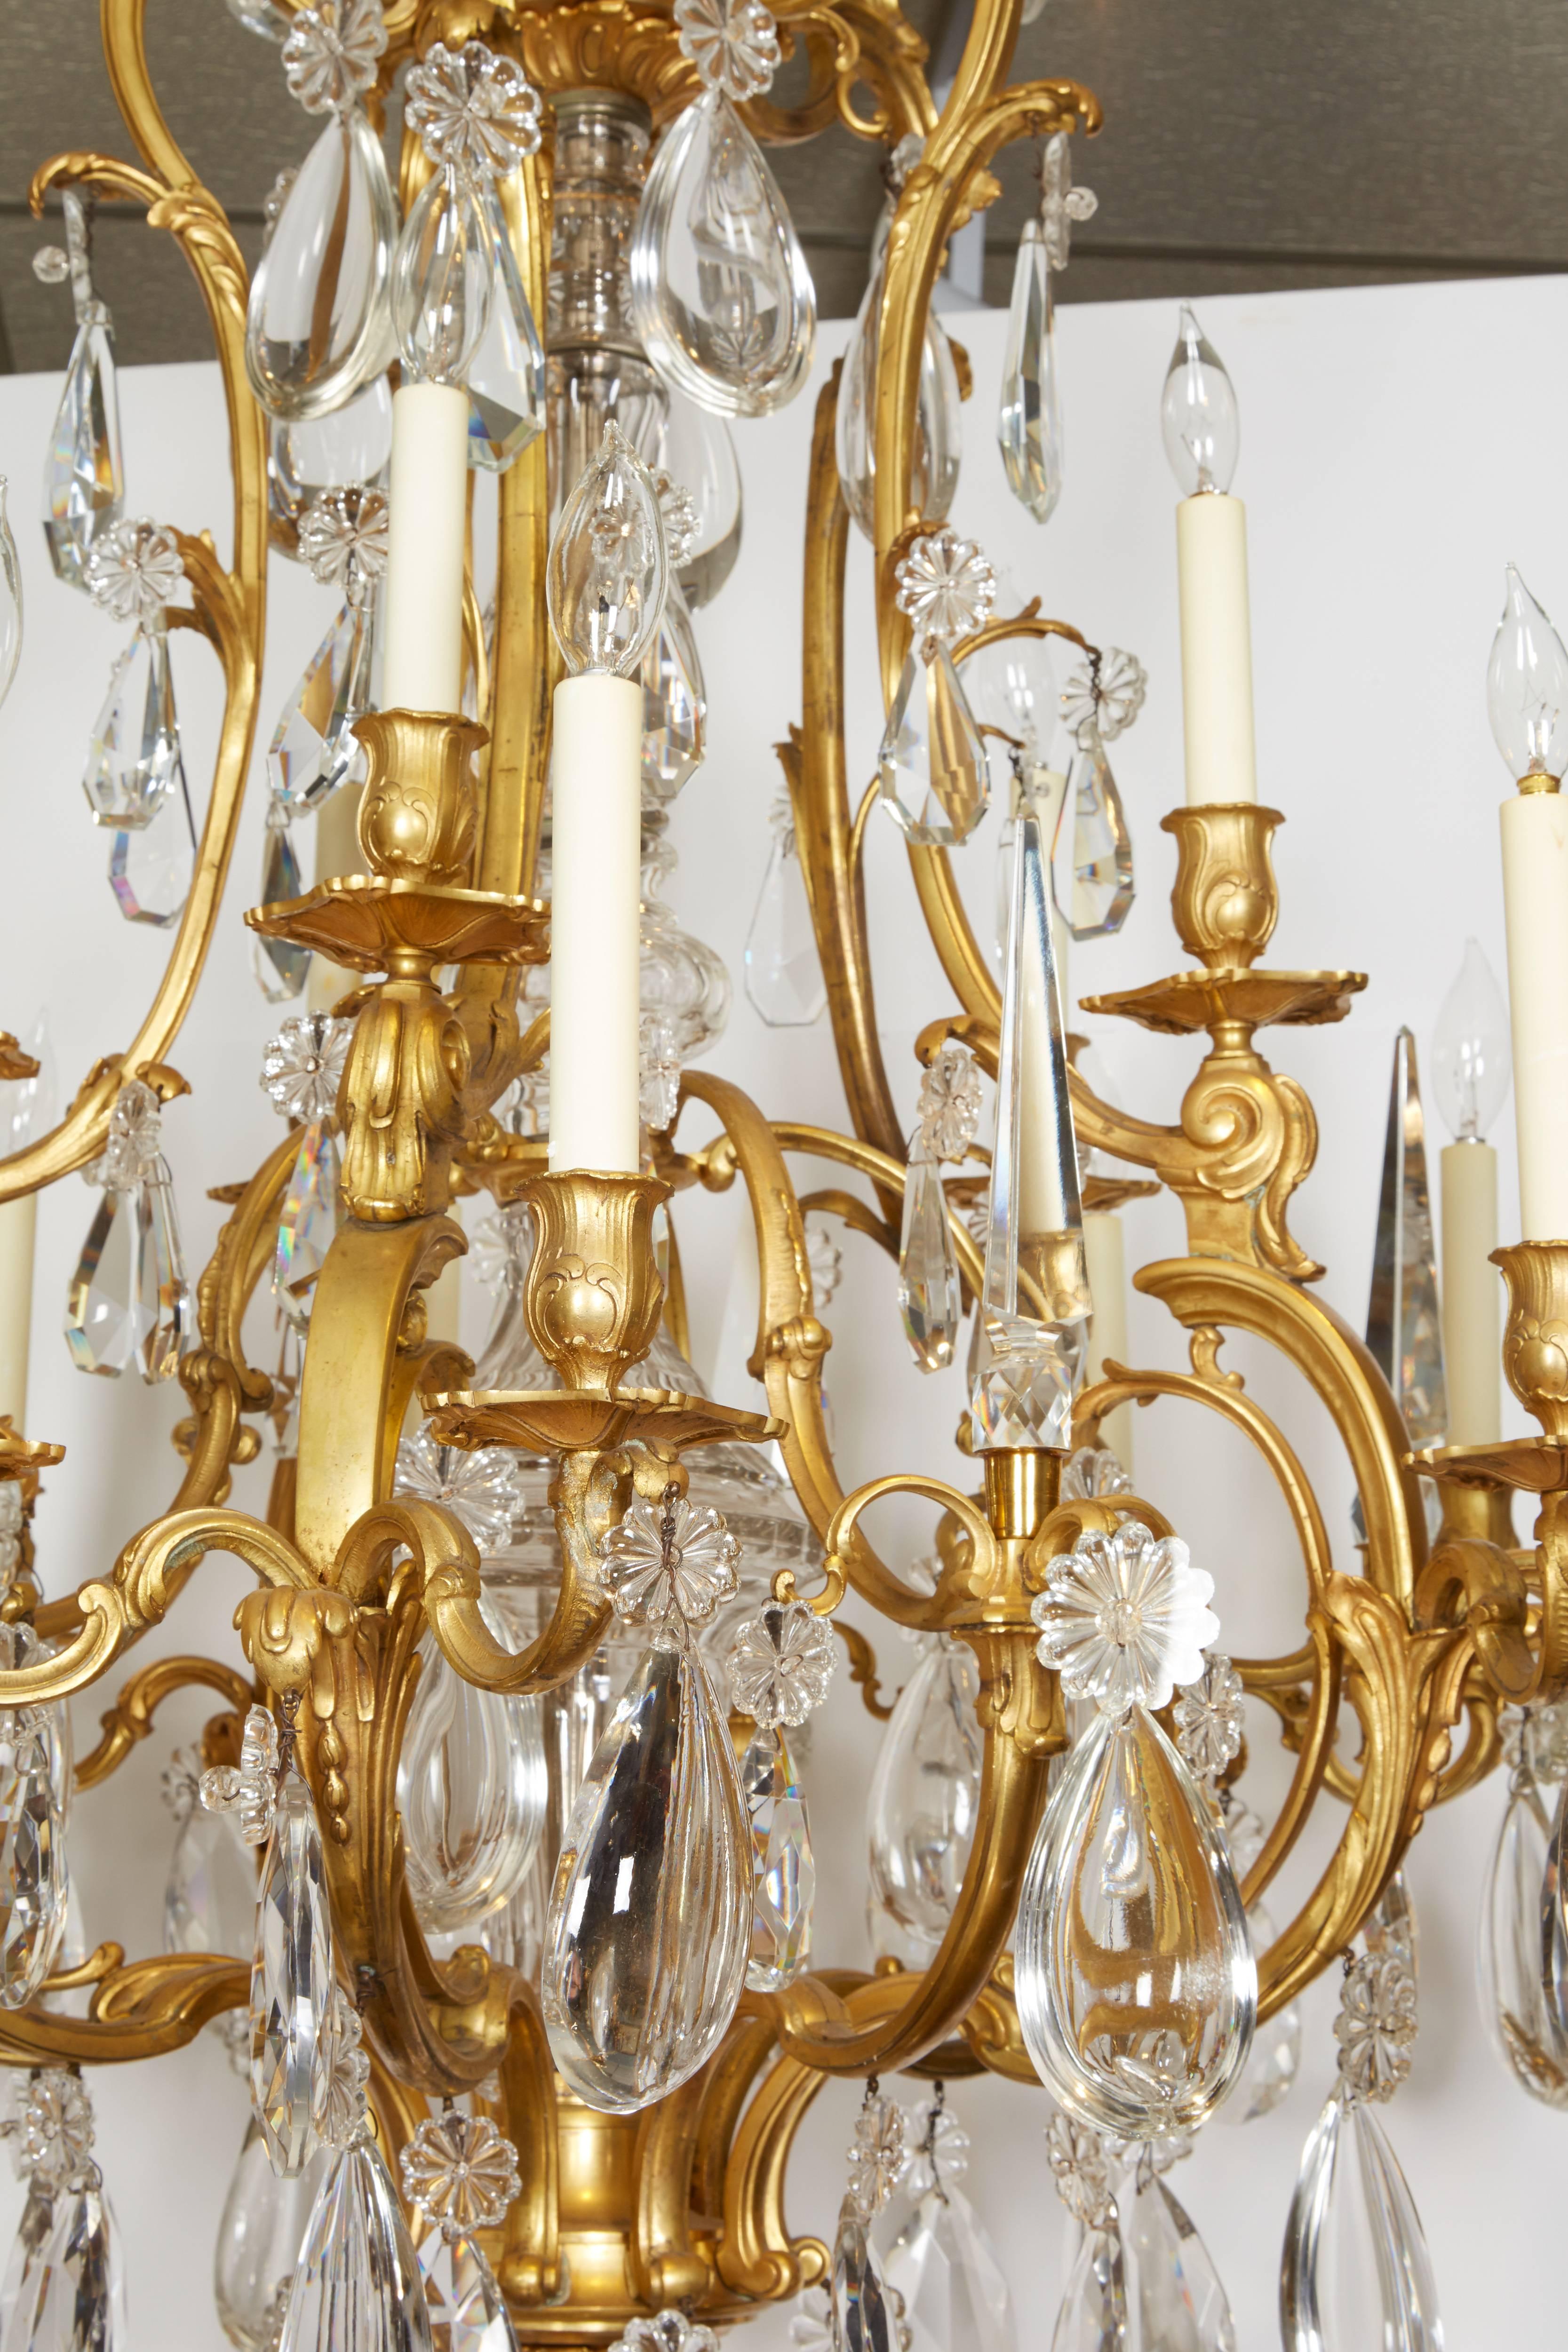 Exceptional French ormolu and Baccarat glass and rock crystal fifteen-light chandelier

Late 19th century. Very high quality French ormolu. 

Candle bobeches in the Art Nouveau taste. 

Its very possible that this chandelier was made by a